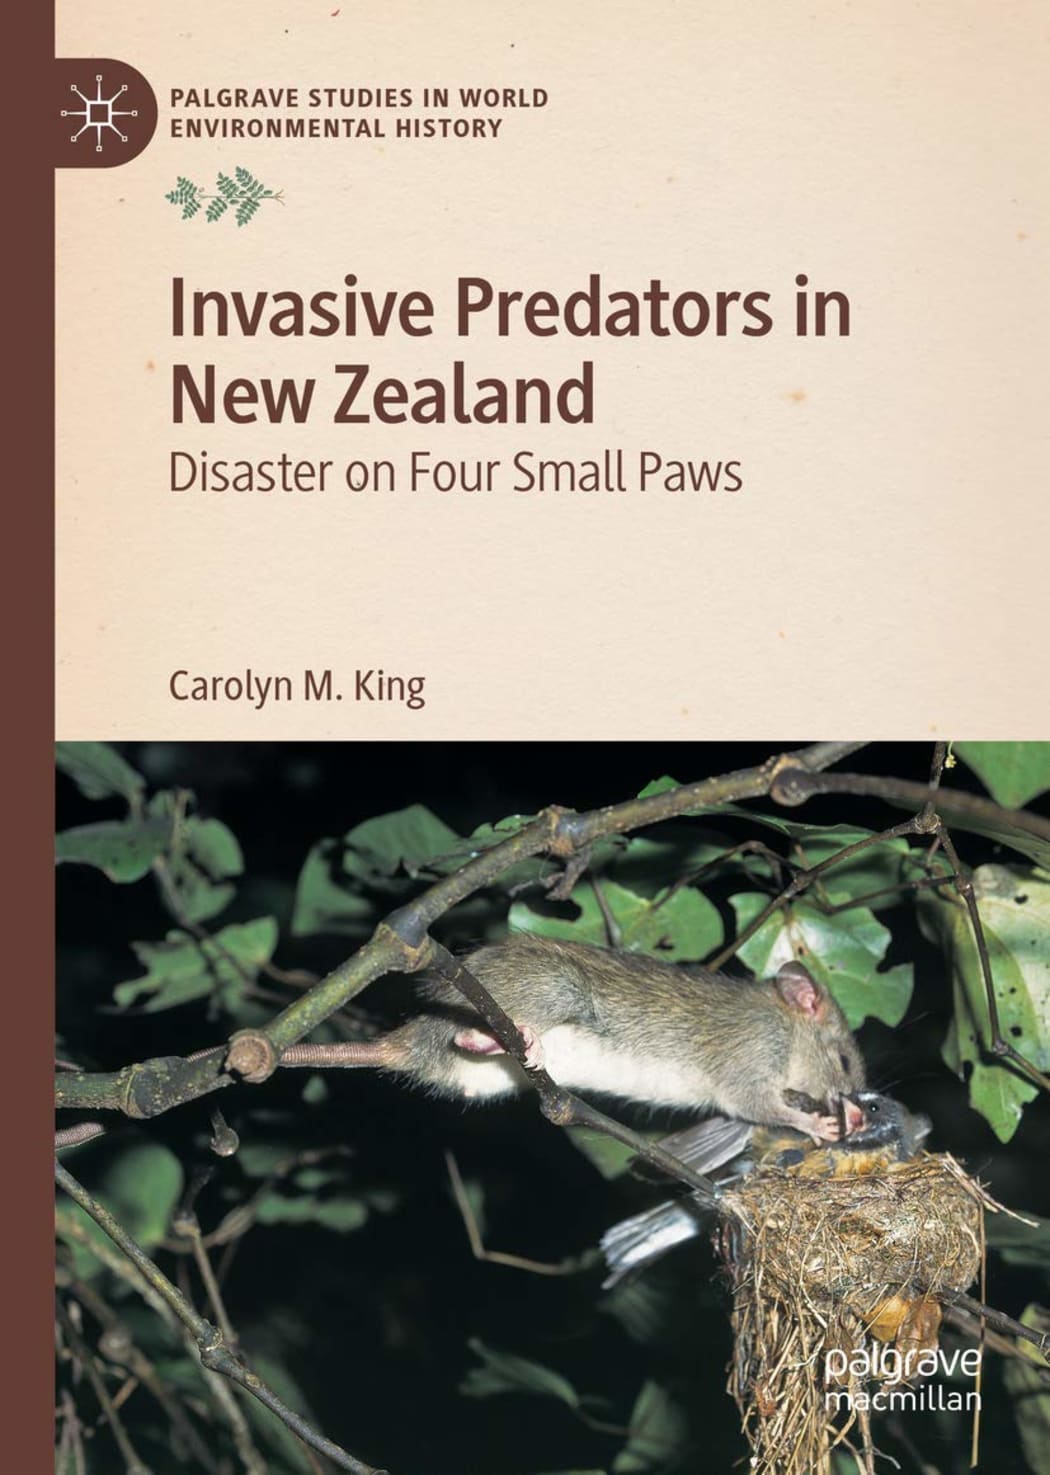 Invasive Predators in New Zealand:Disaster on Four Small Paws by Carolyn M King